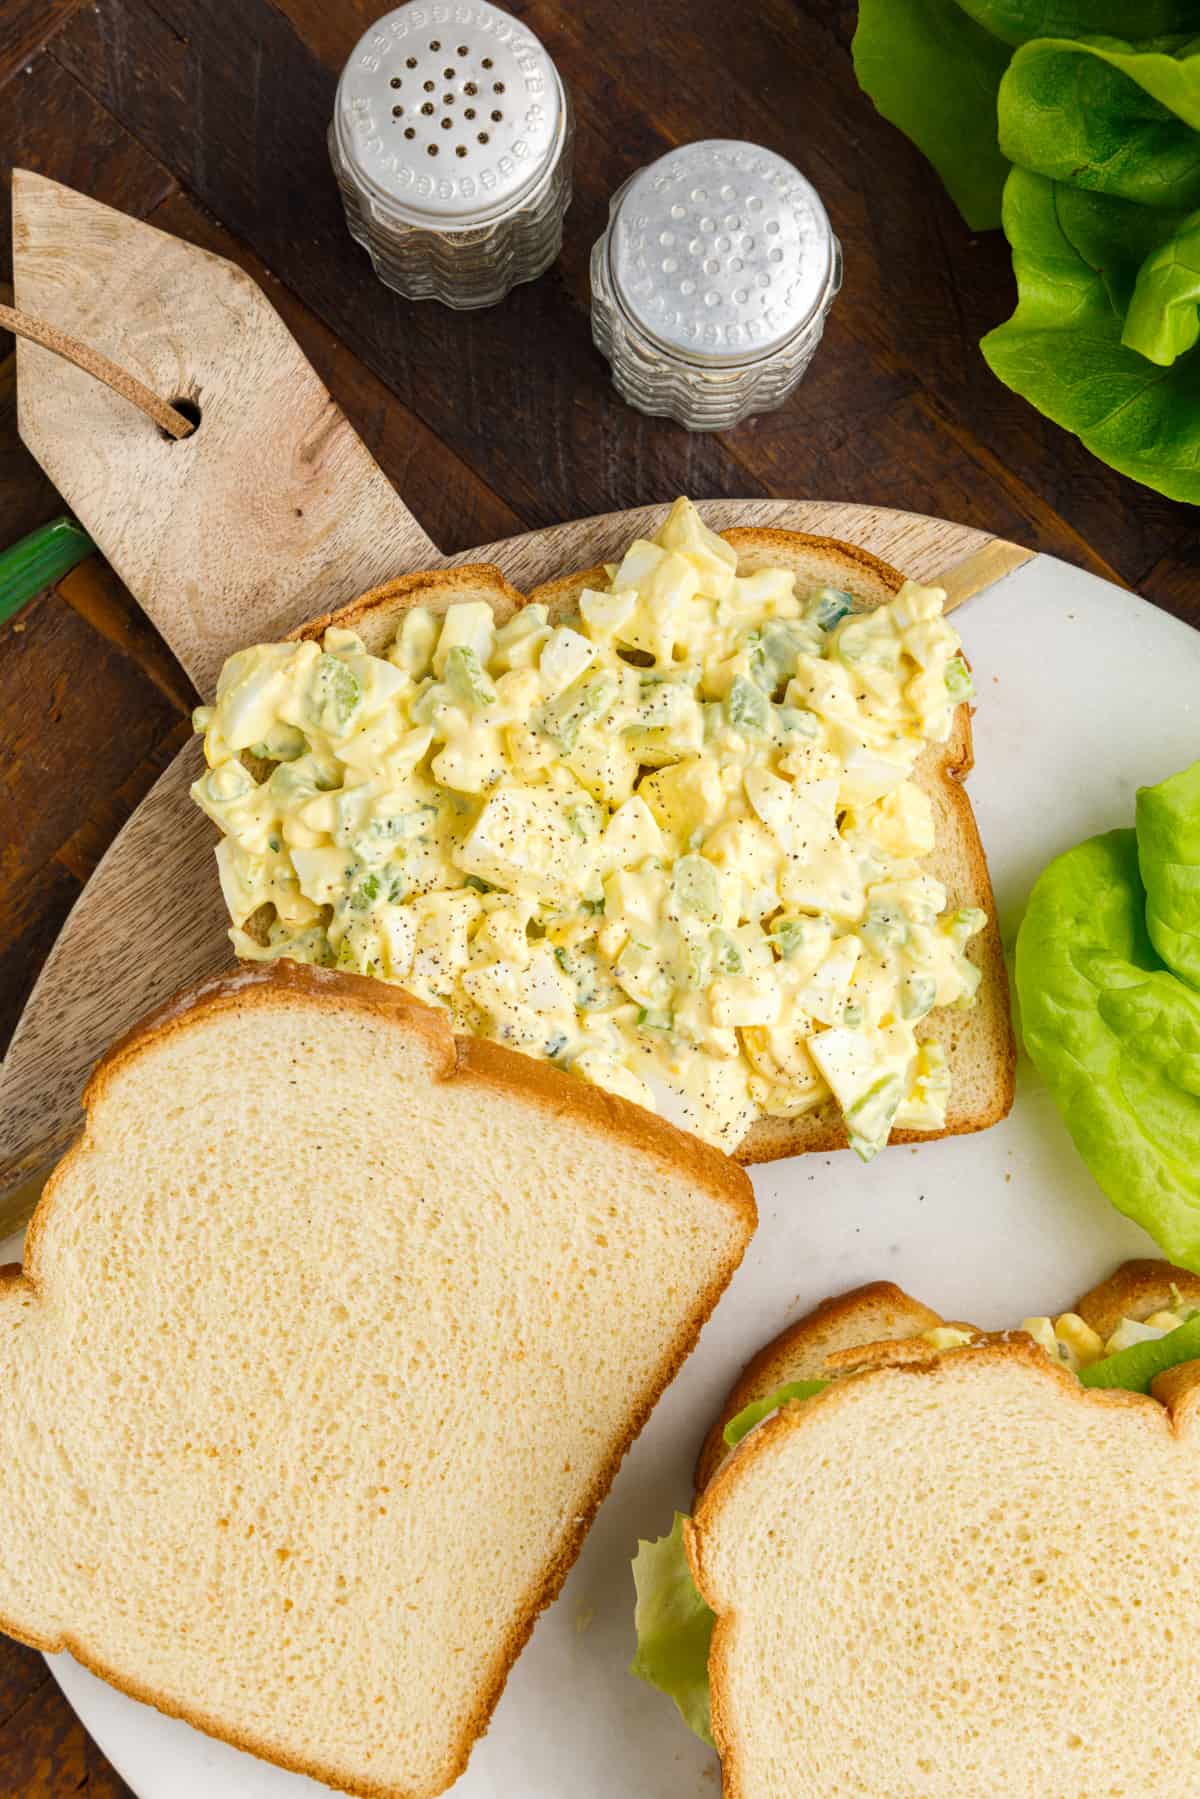 Egg salad with salt and pepper on sandwich bread with lettuce and additional slices of bread around it.